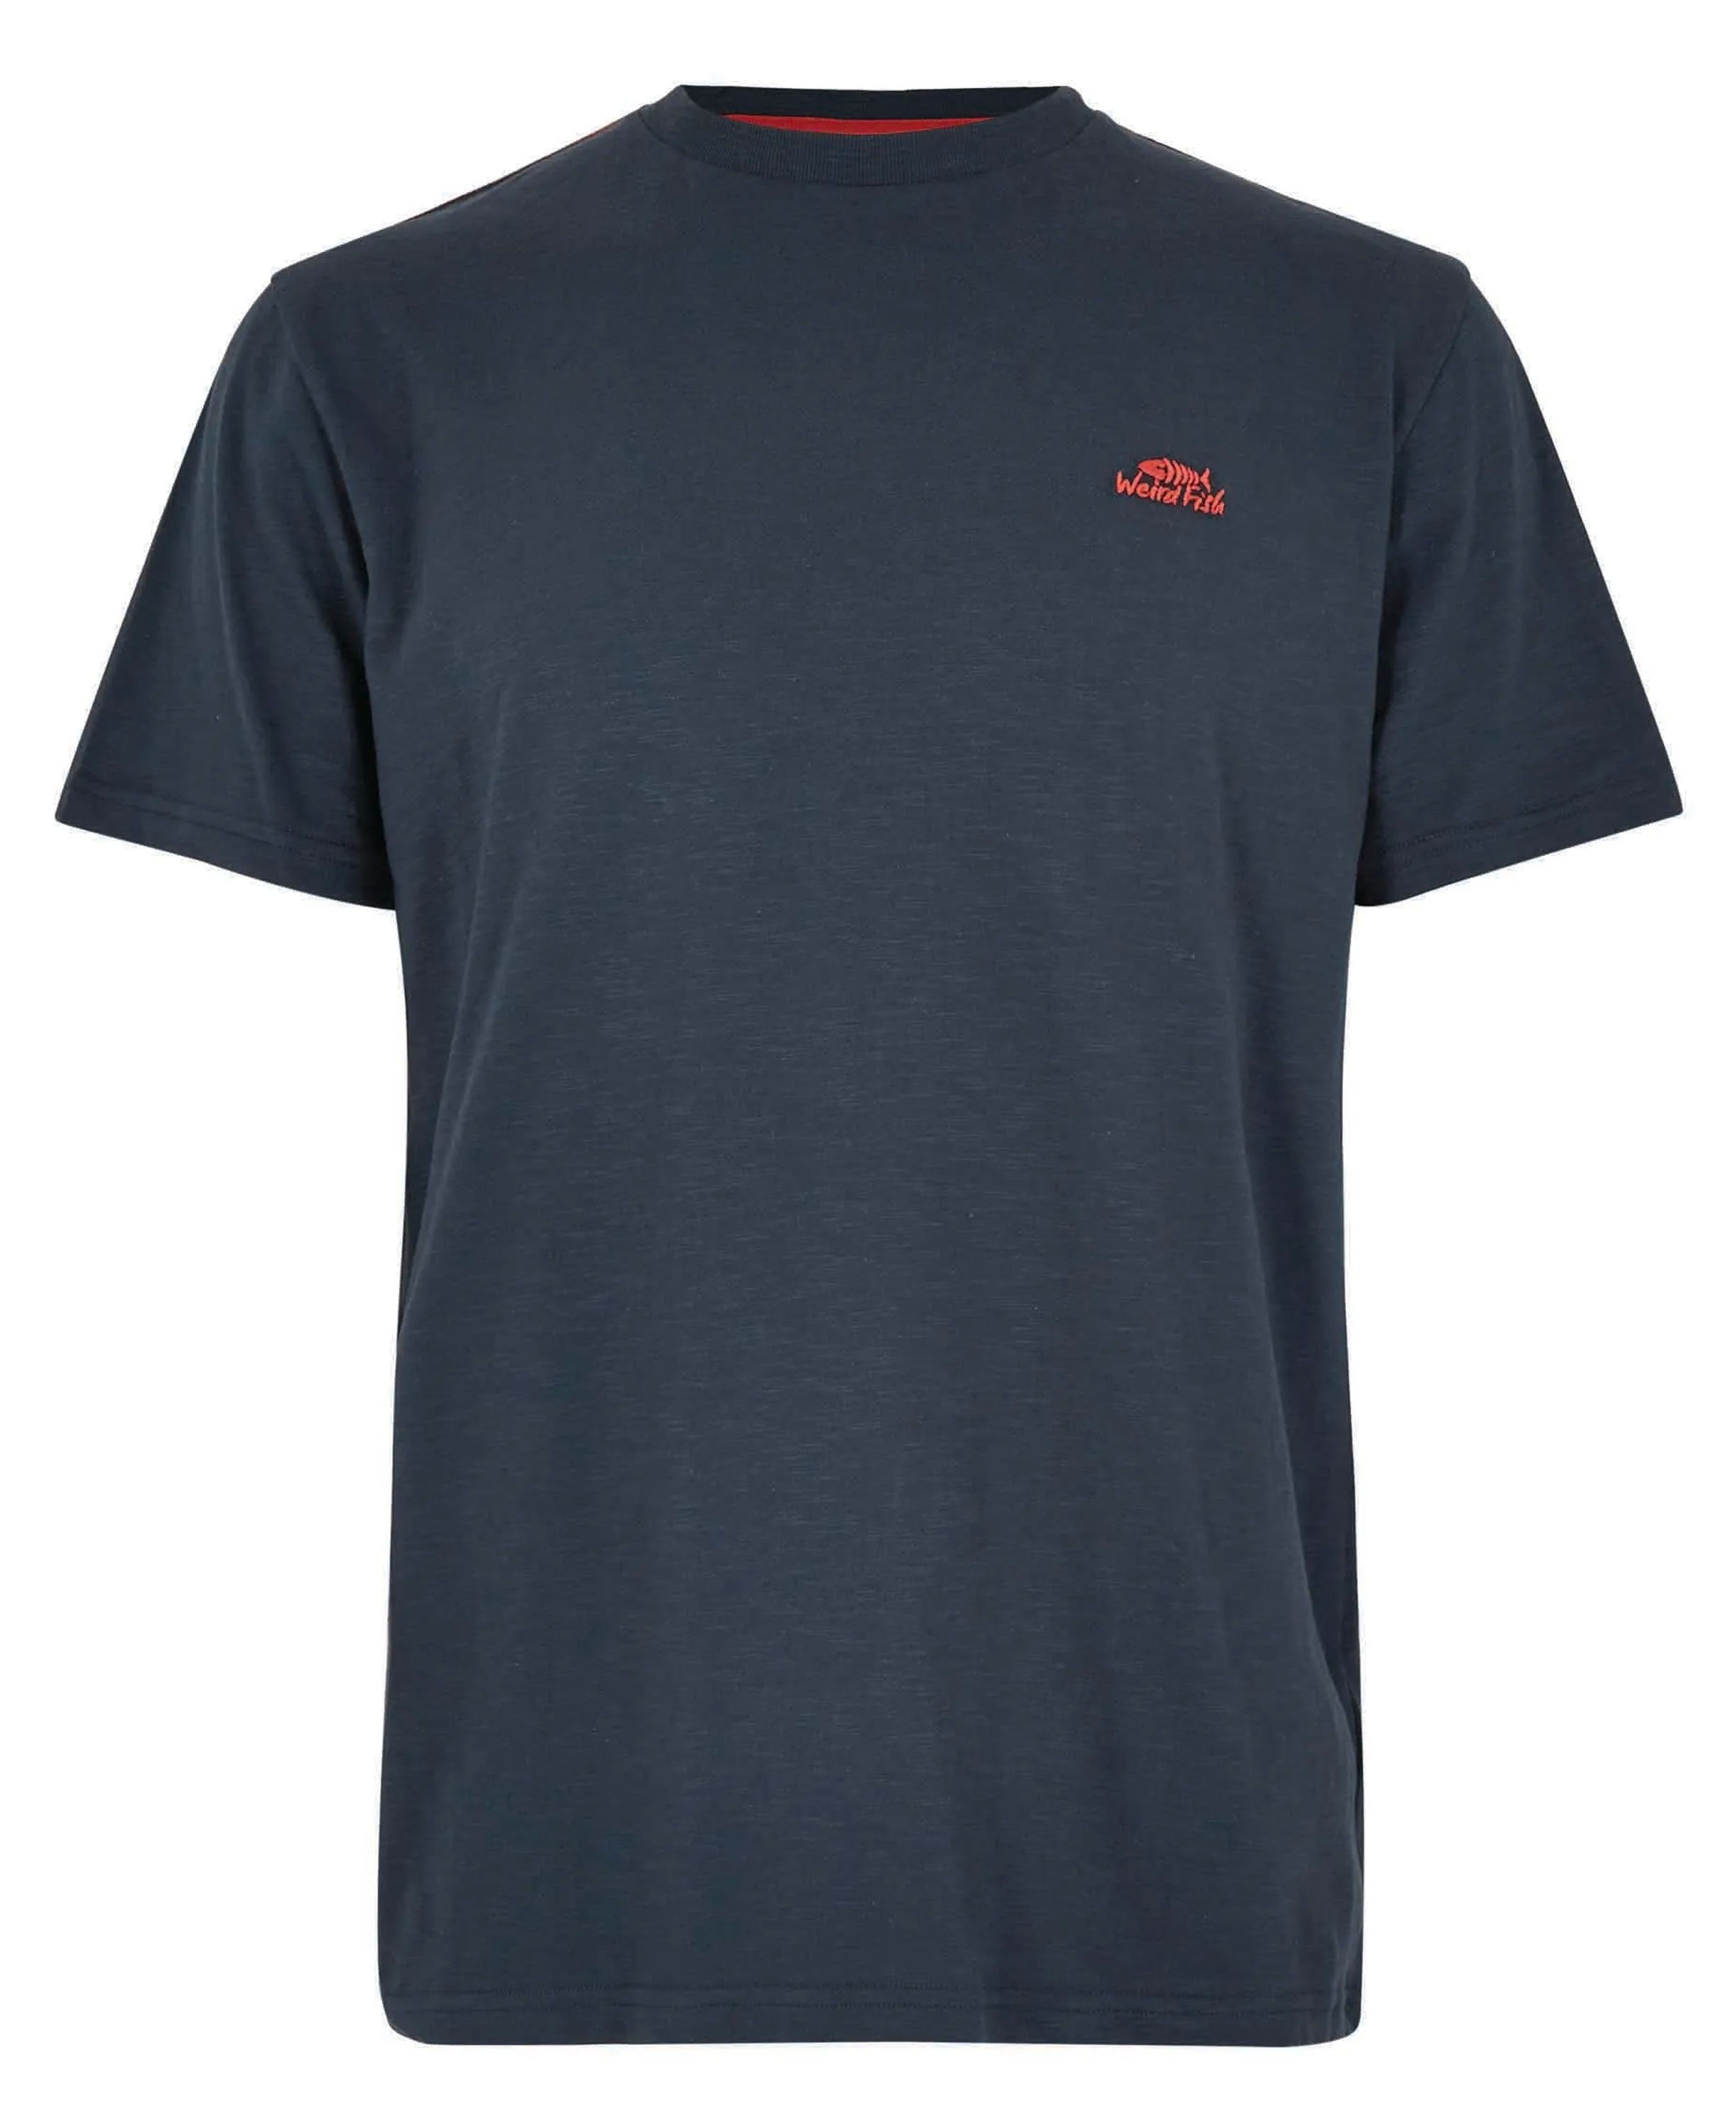 Fished Organic Branded Tee - Navy